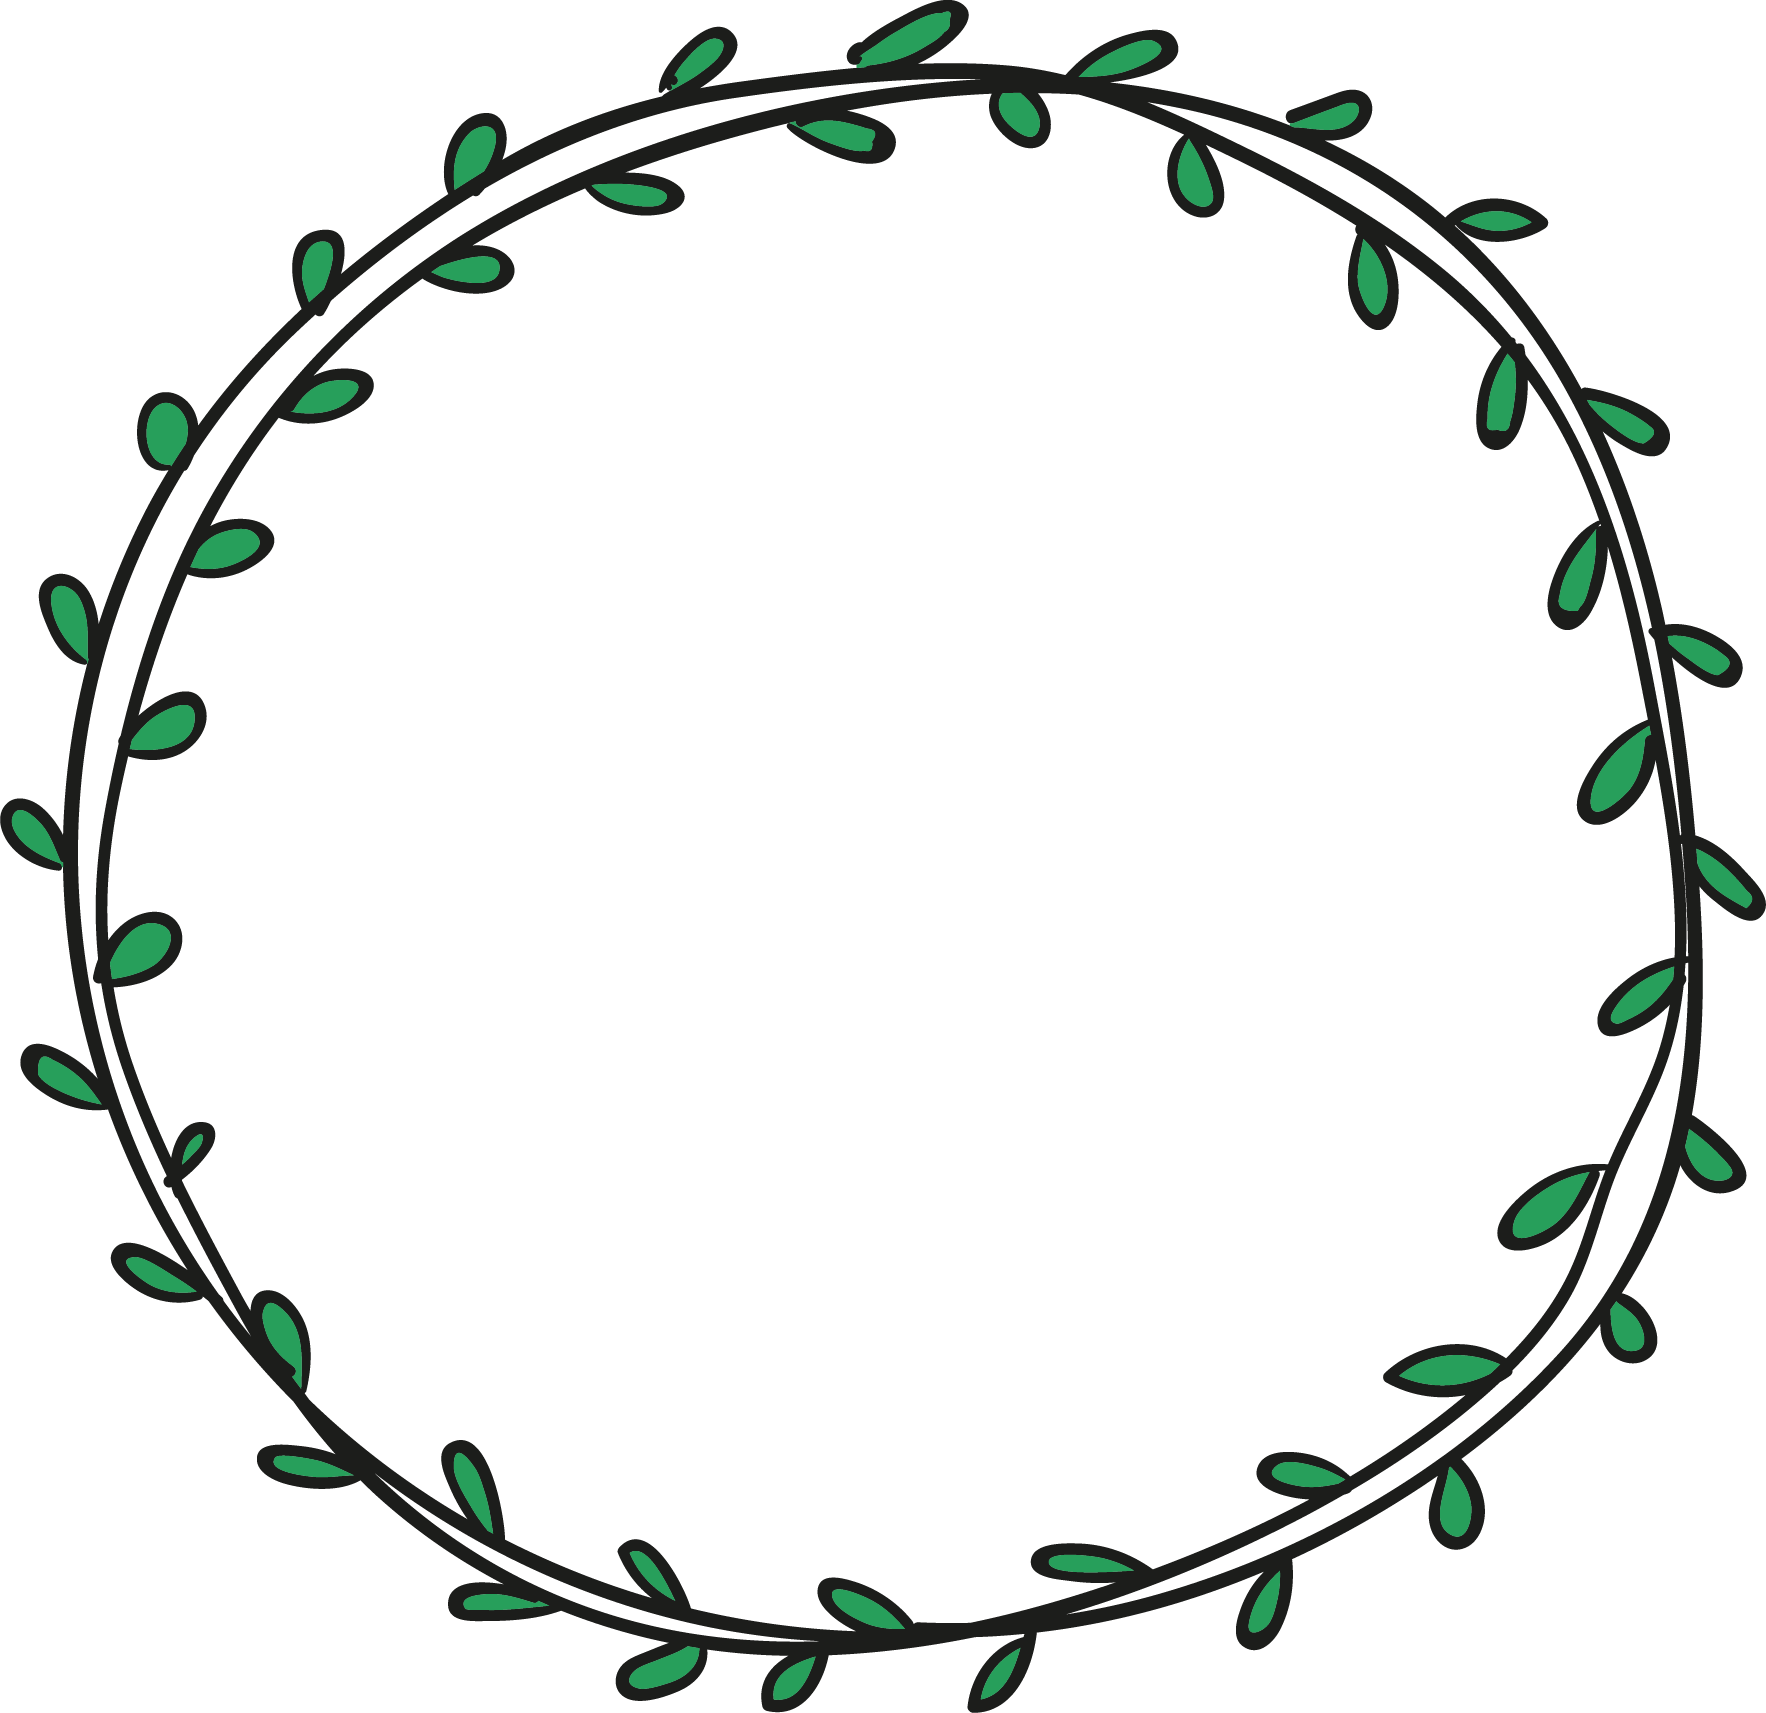 Scalable Vector Graphics - Circle Leaf Border Png.